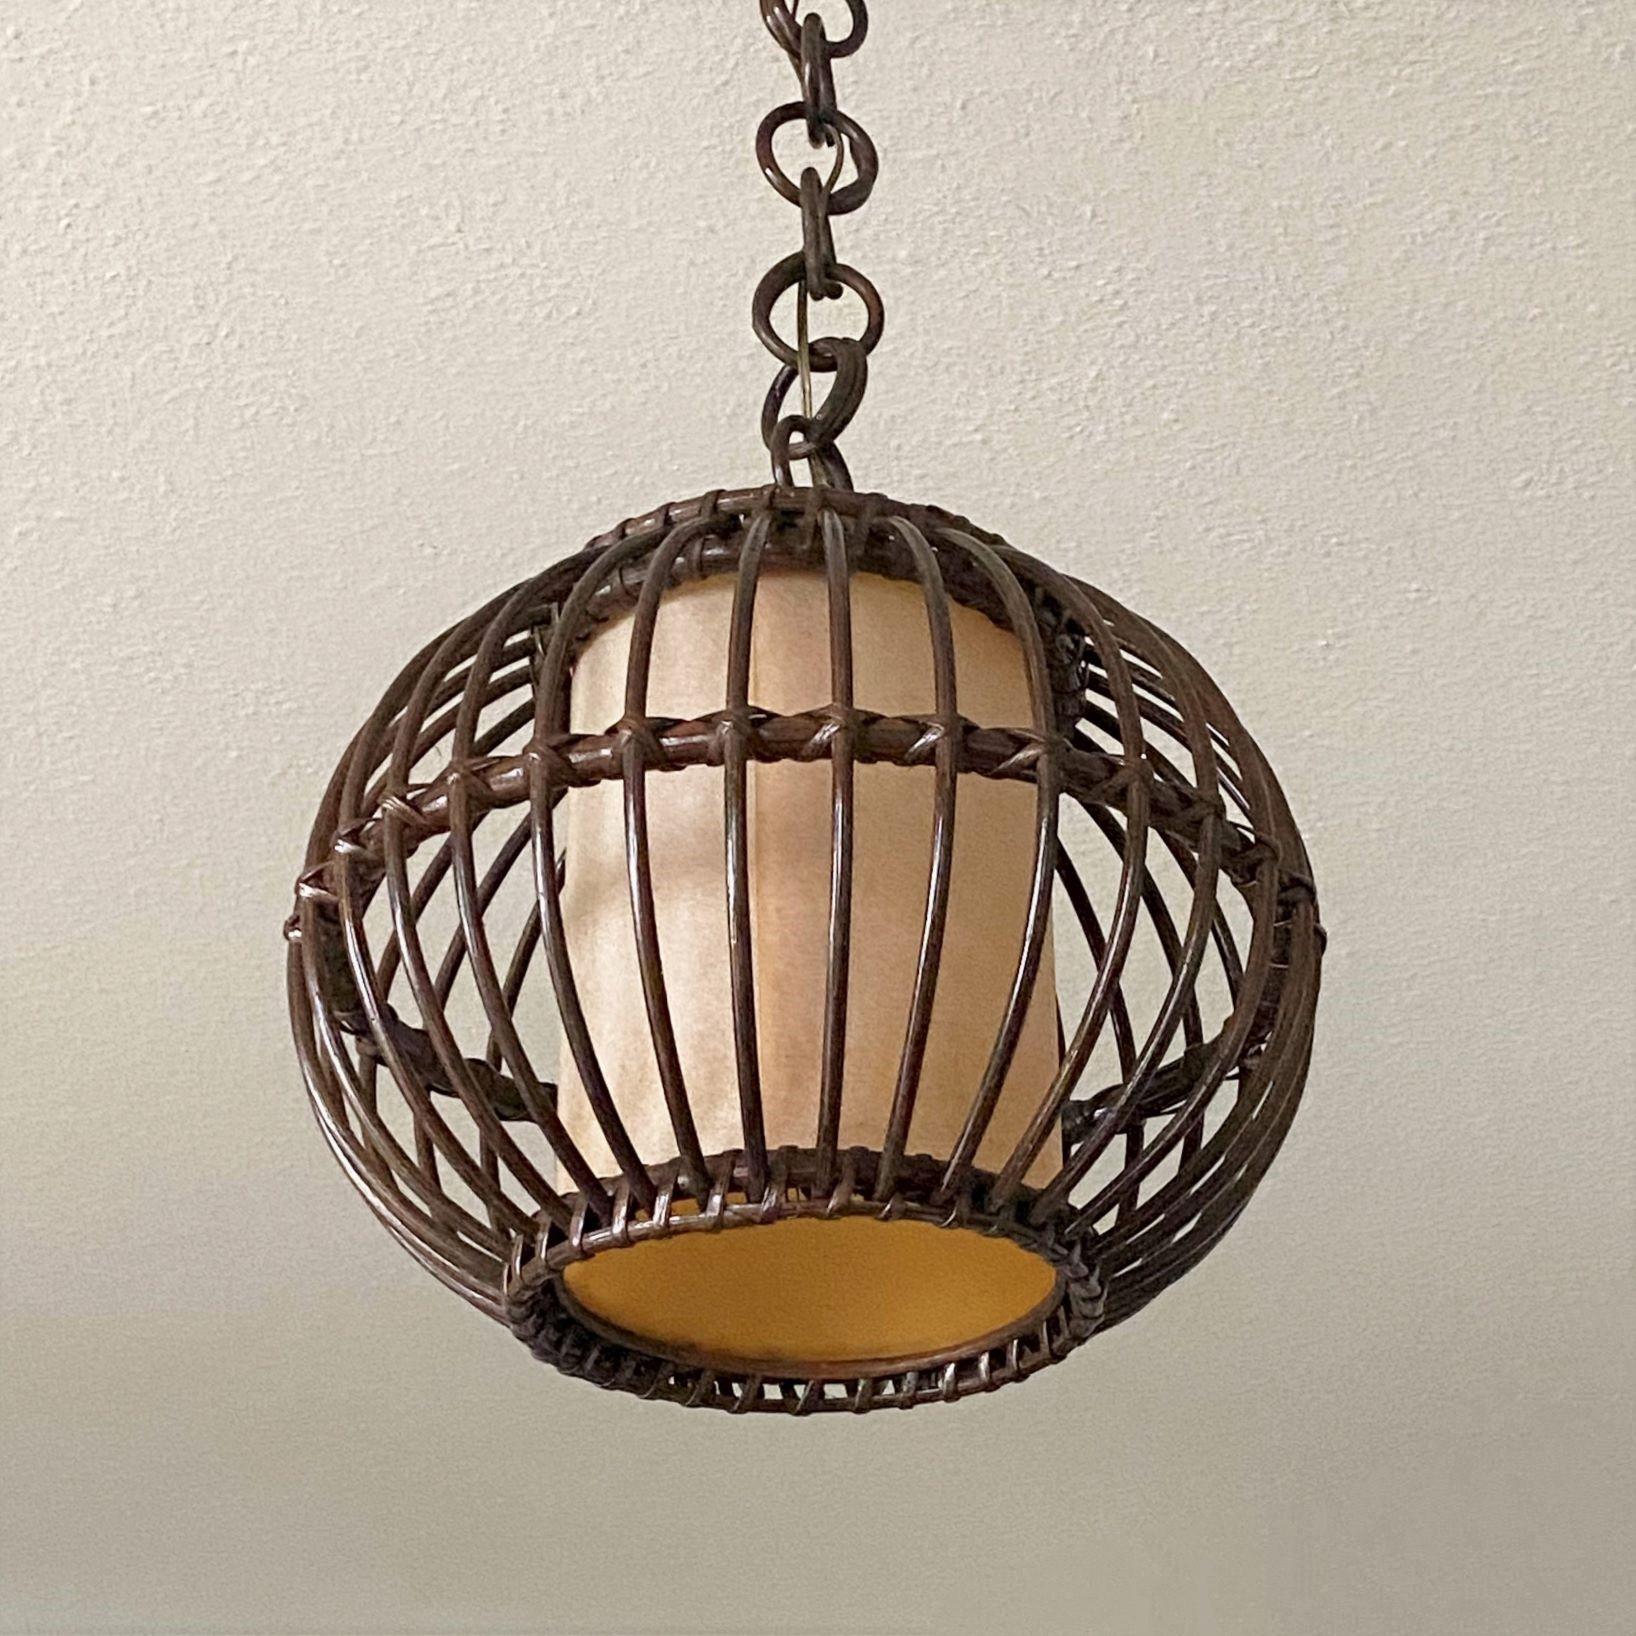 Hand-Crafted Handcrafted Rattan Wicker Globe Pendant with Perchament Lamp Shade, Spain, 1950s For Sale